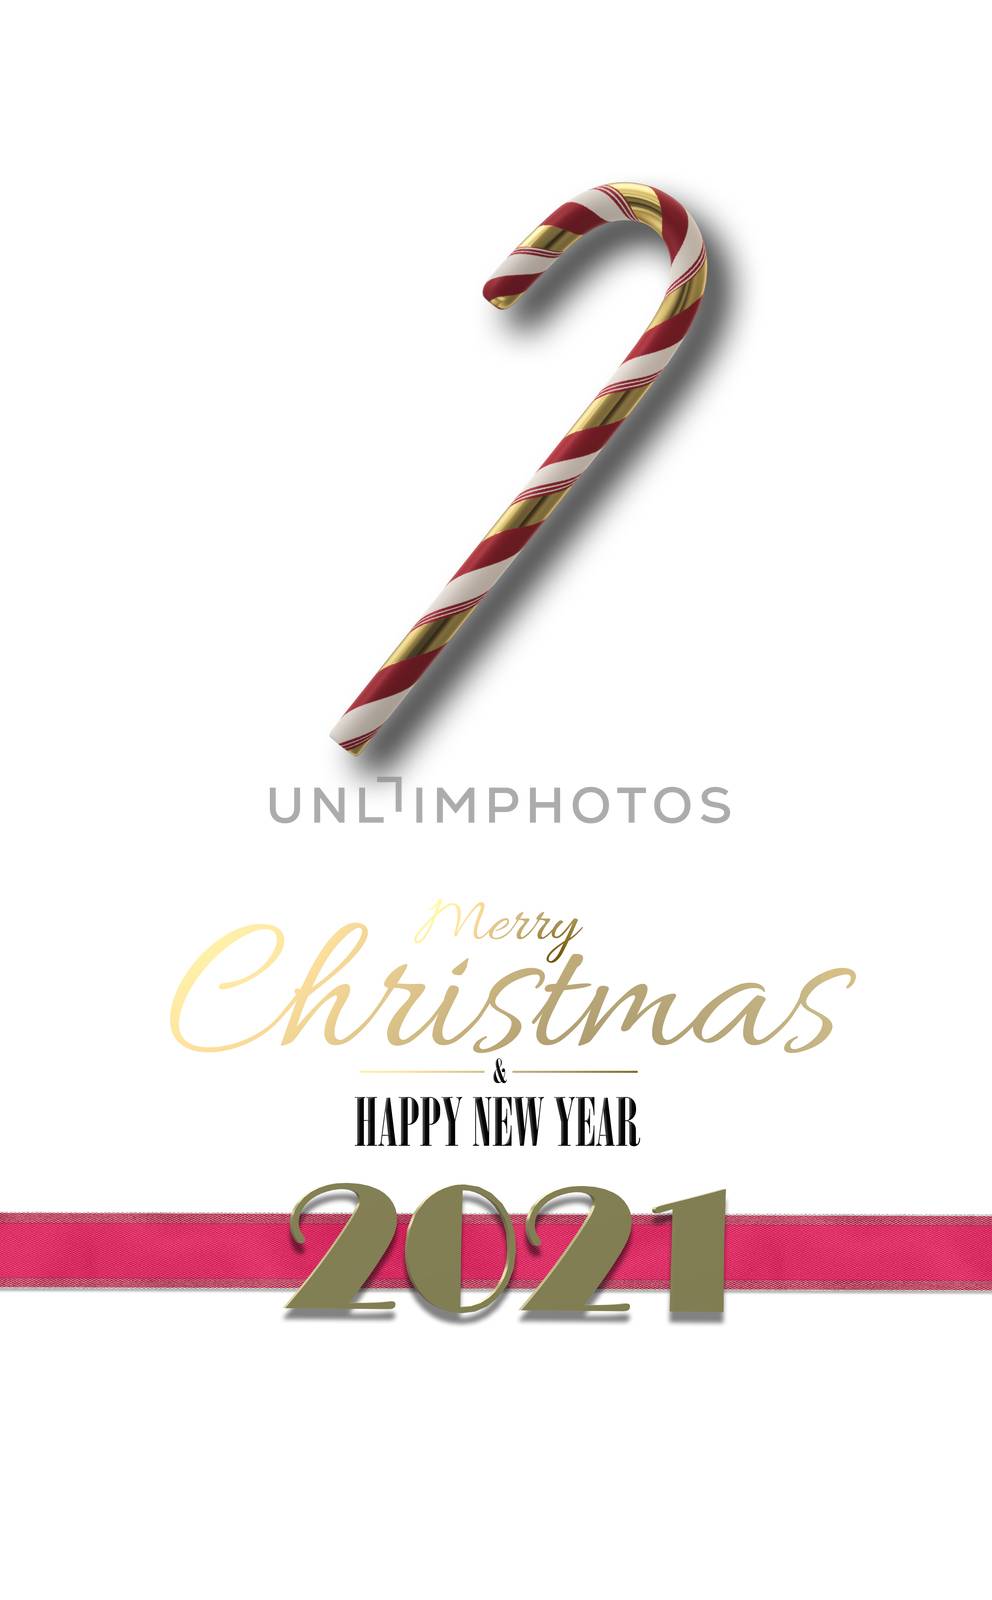 Christmas holiday background. 3D realistic Xmas symbol candy cane on white background. Ribbon with gold digit 2021. Text Merry Christmas Happy New Year. Vertical 3D illustration